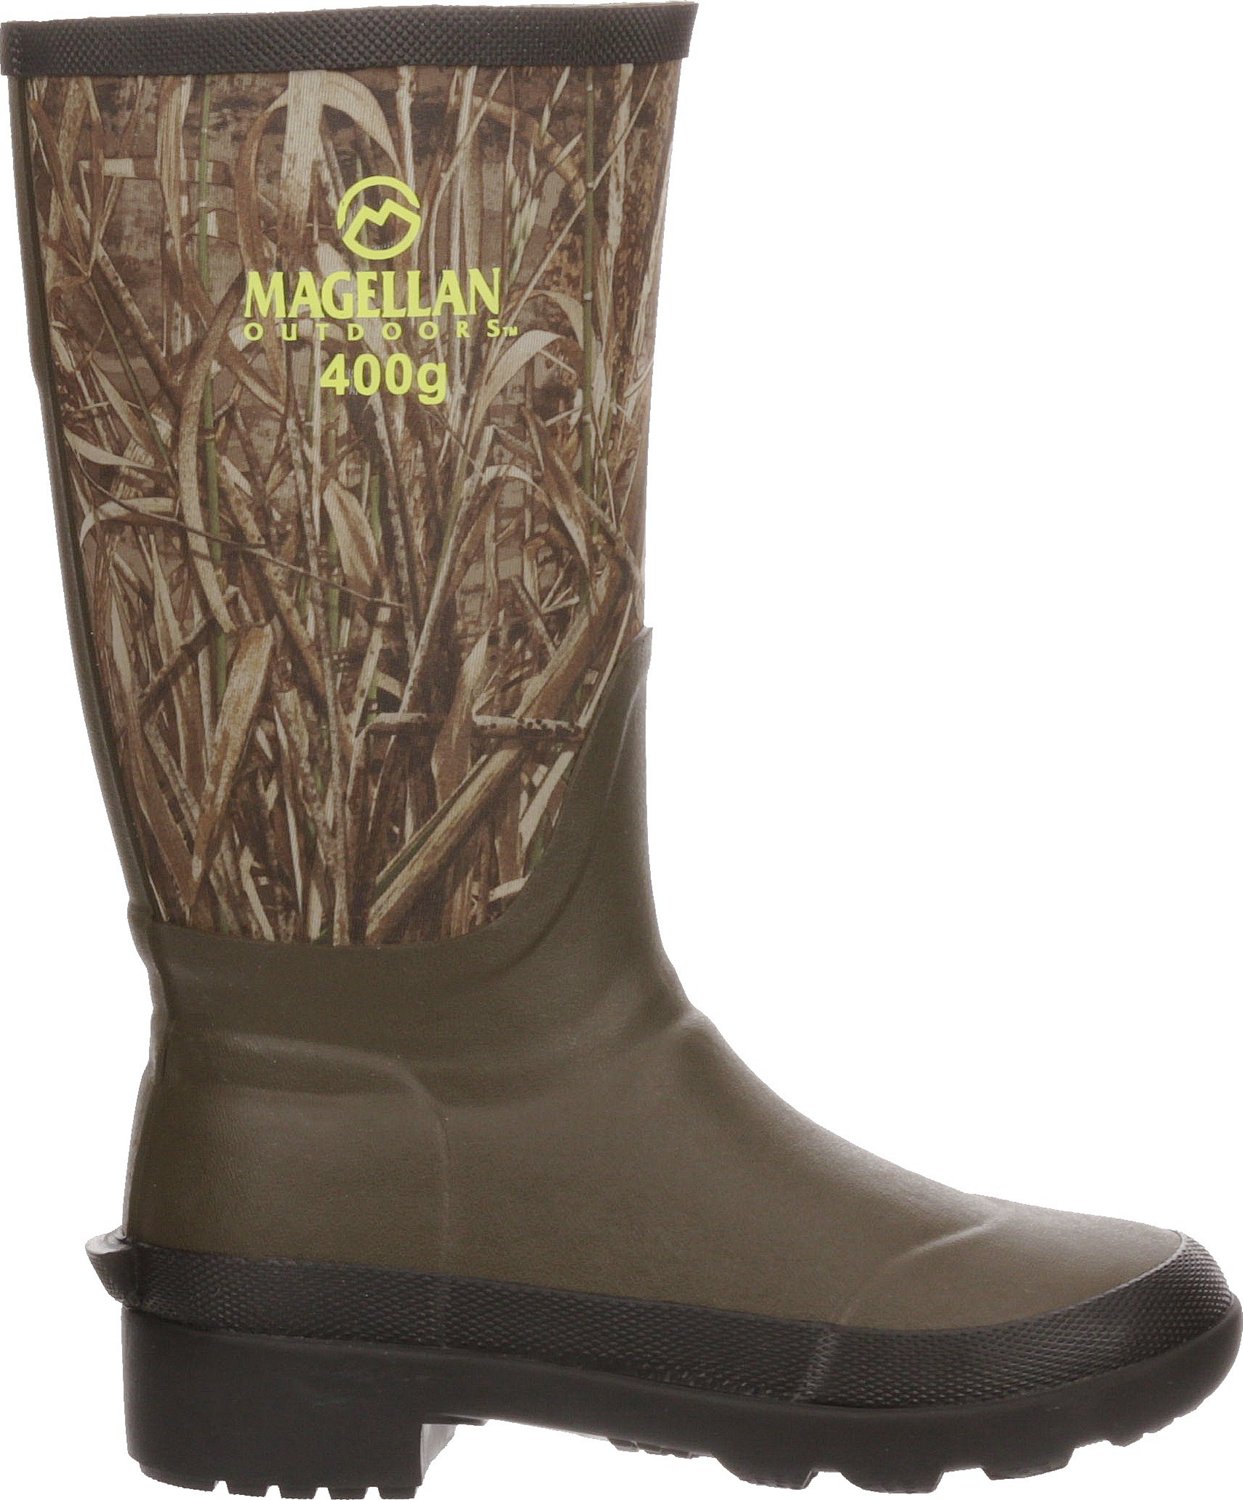 Boys' Hunting Boots | Boys' Camo Boots, Boys' Hunting Shoes | Academy